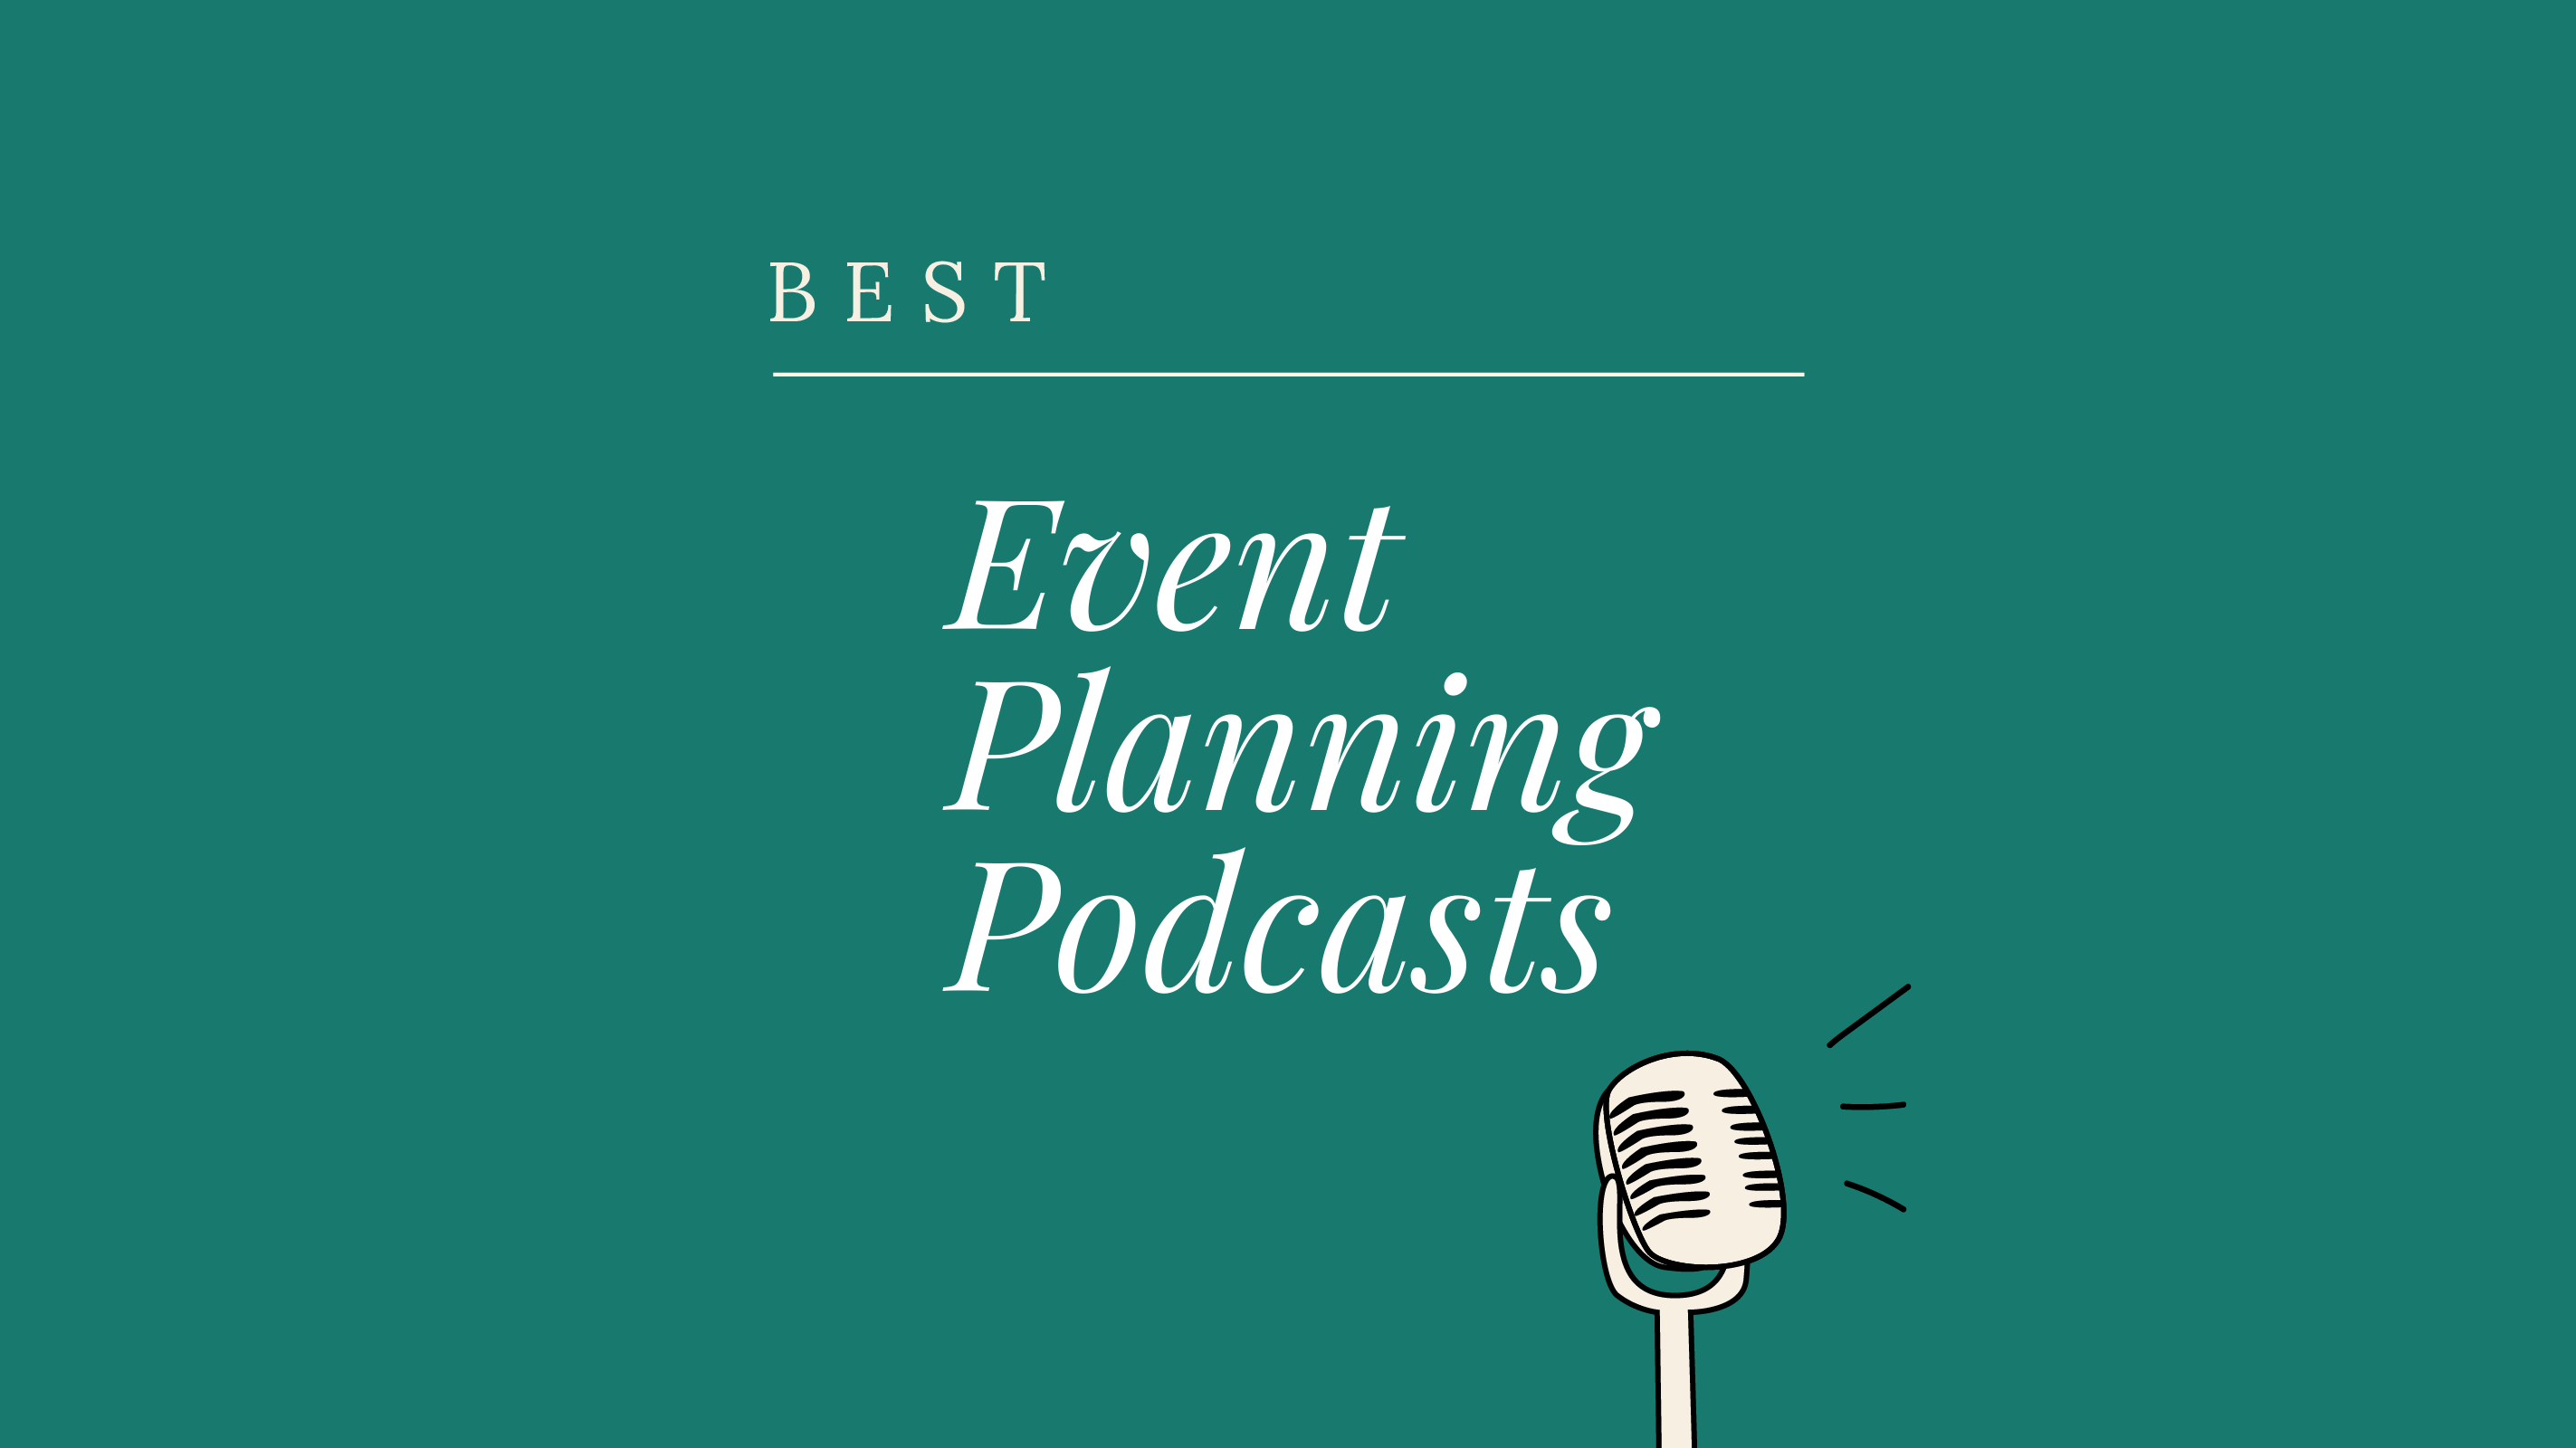 HOT-event-planning-podcasts-featured-image-1907